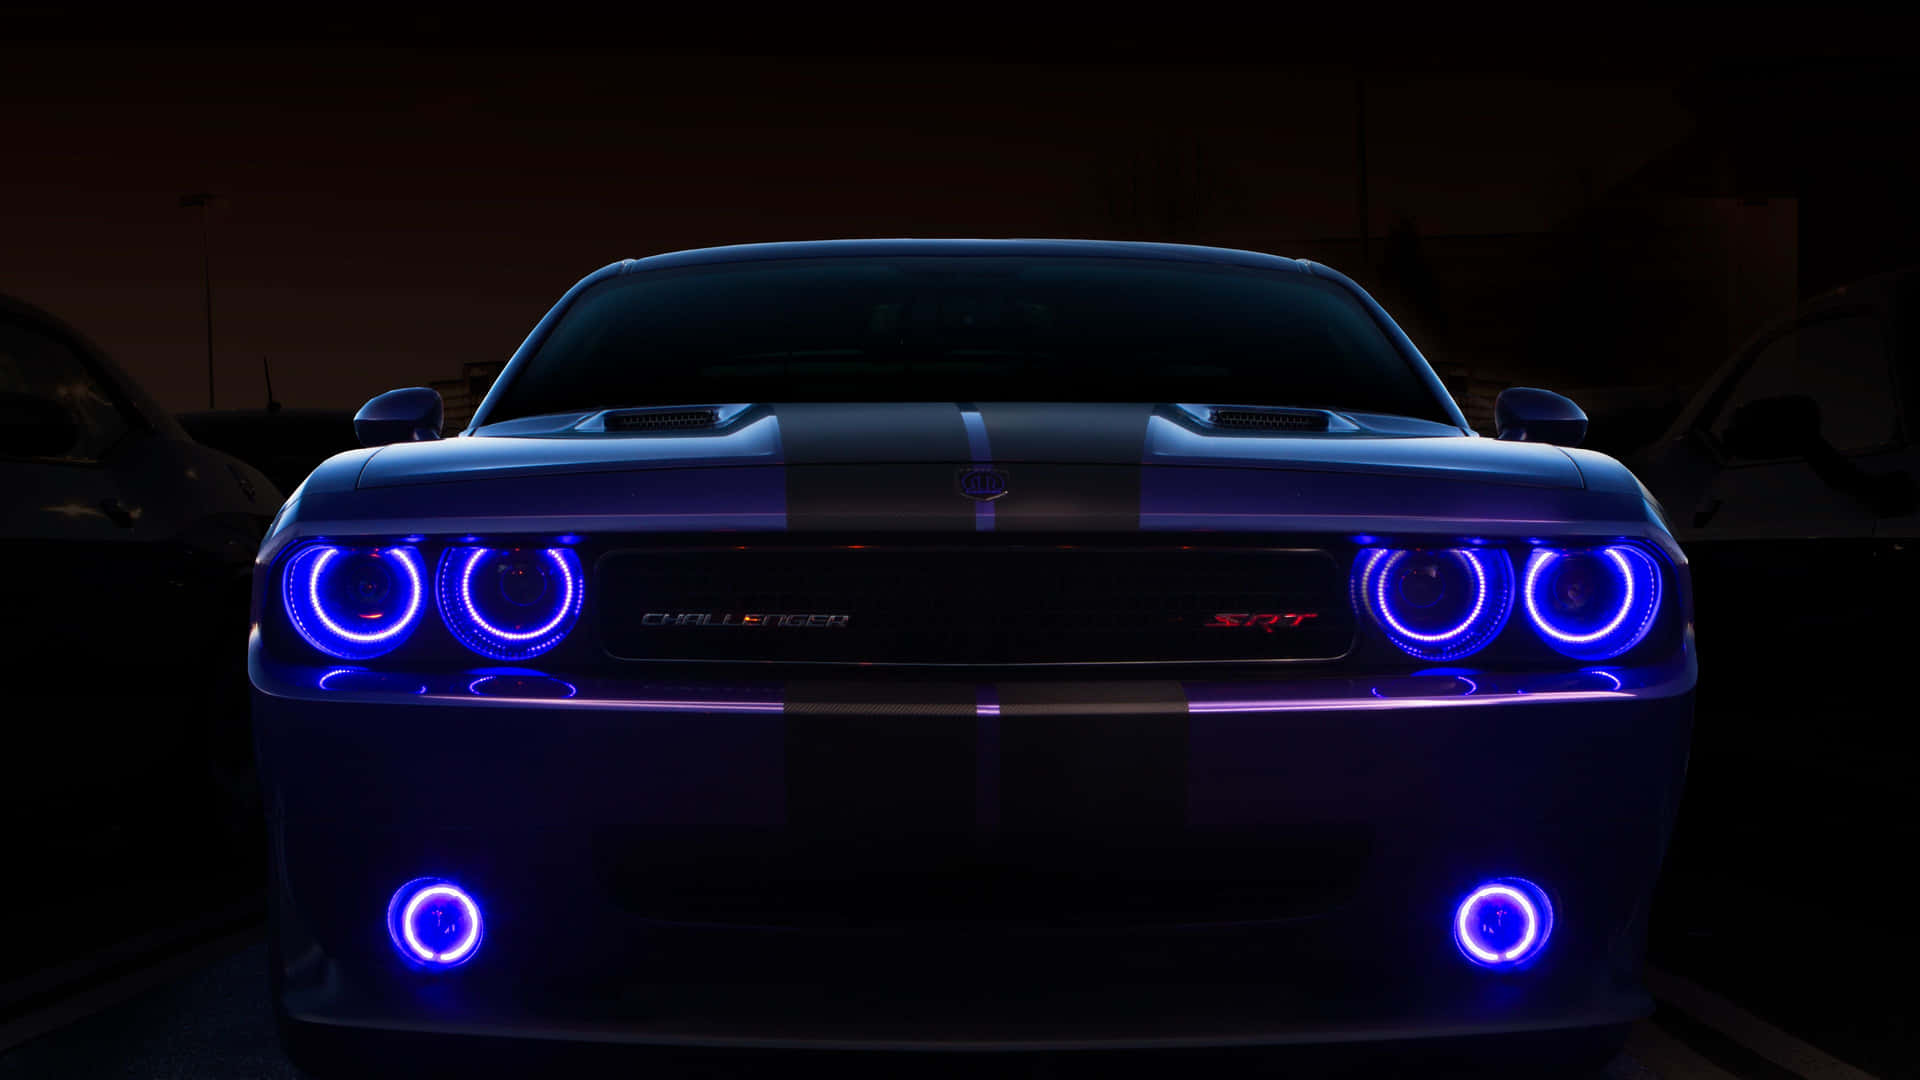 The Bold and Powerful Dodge Challenger Wallpaper